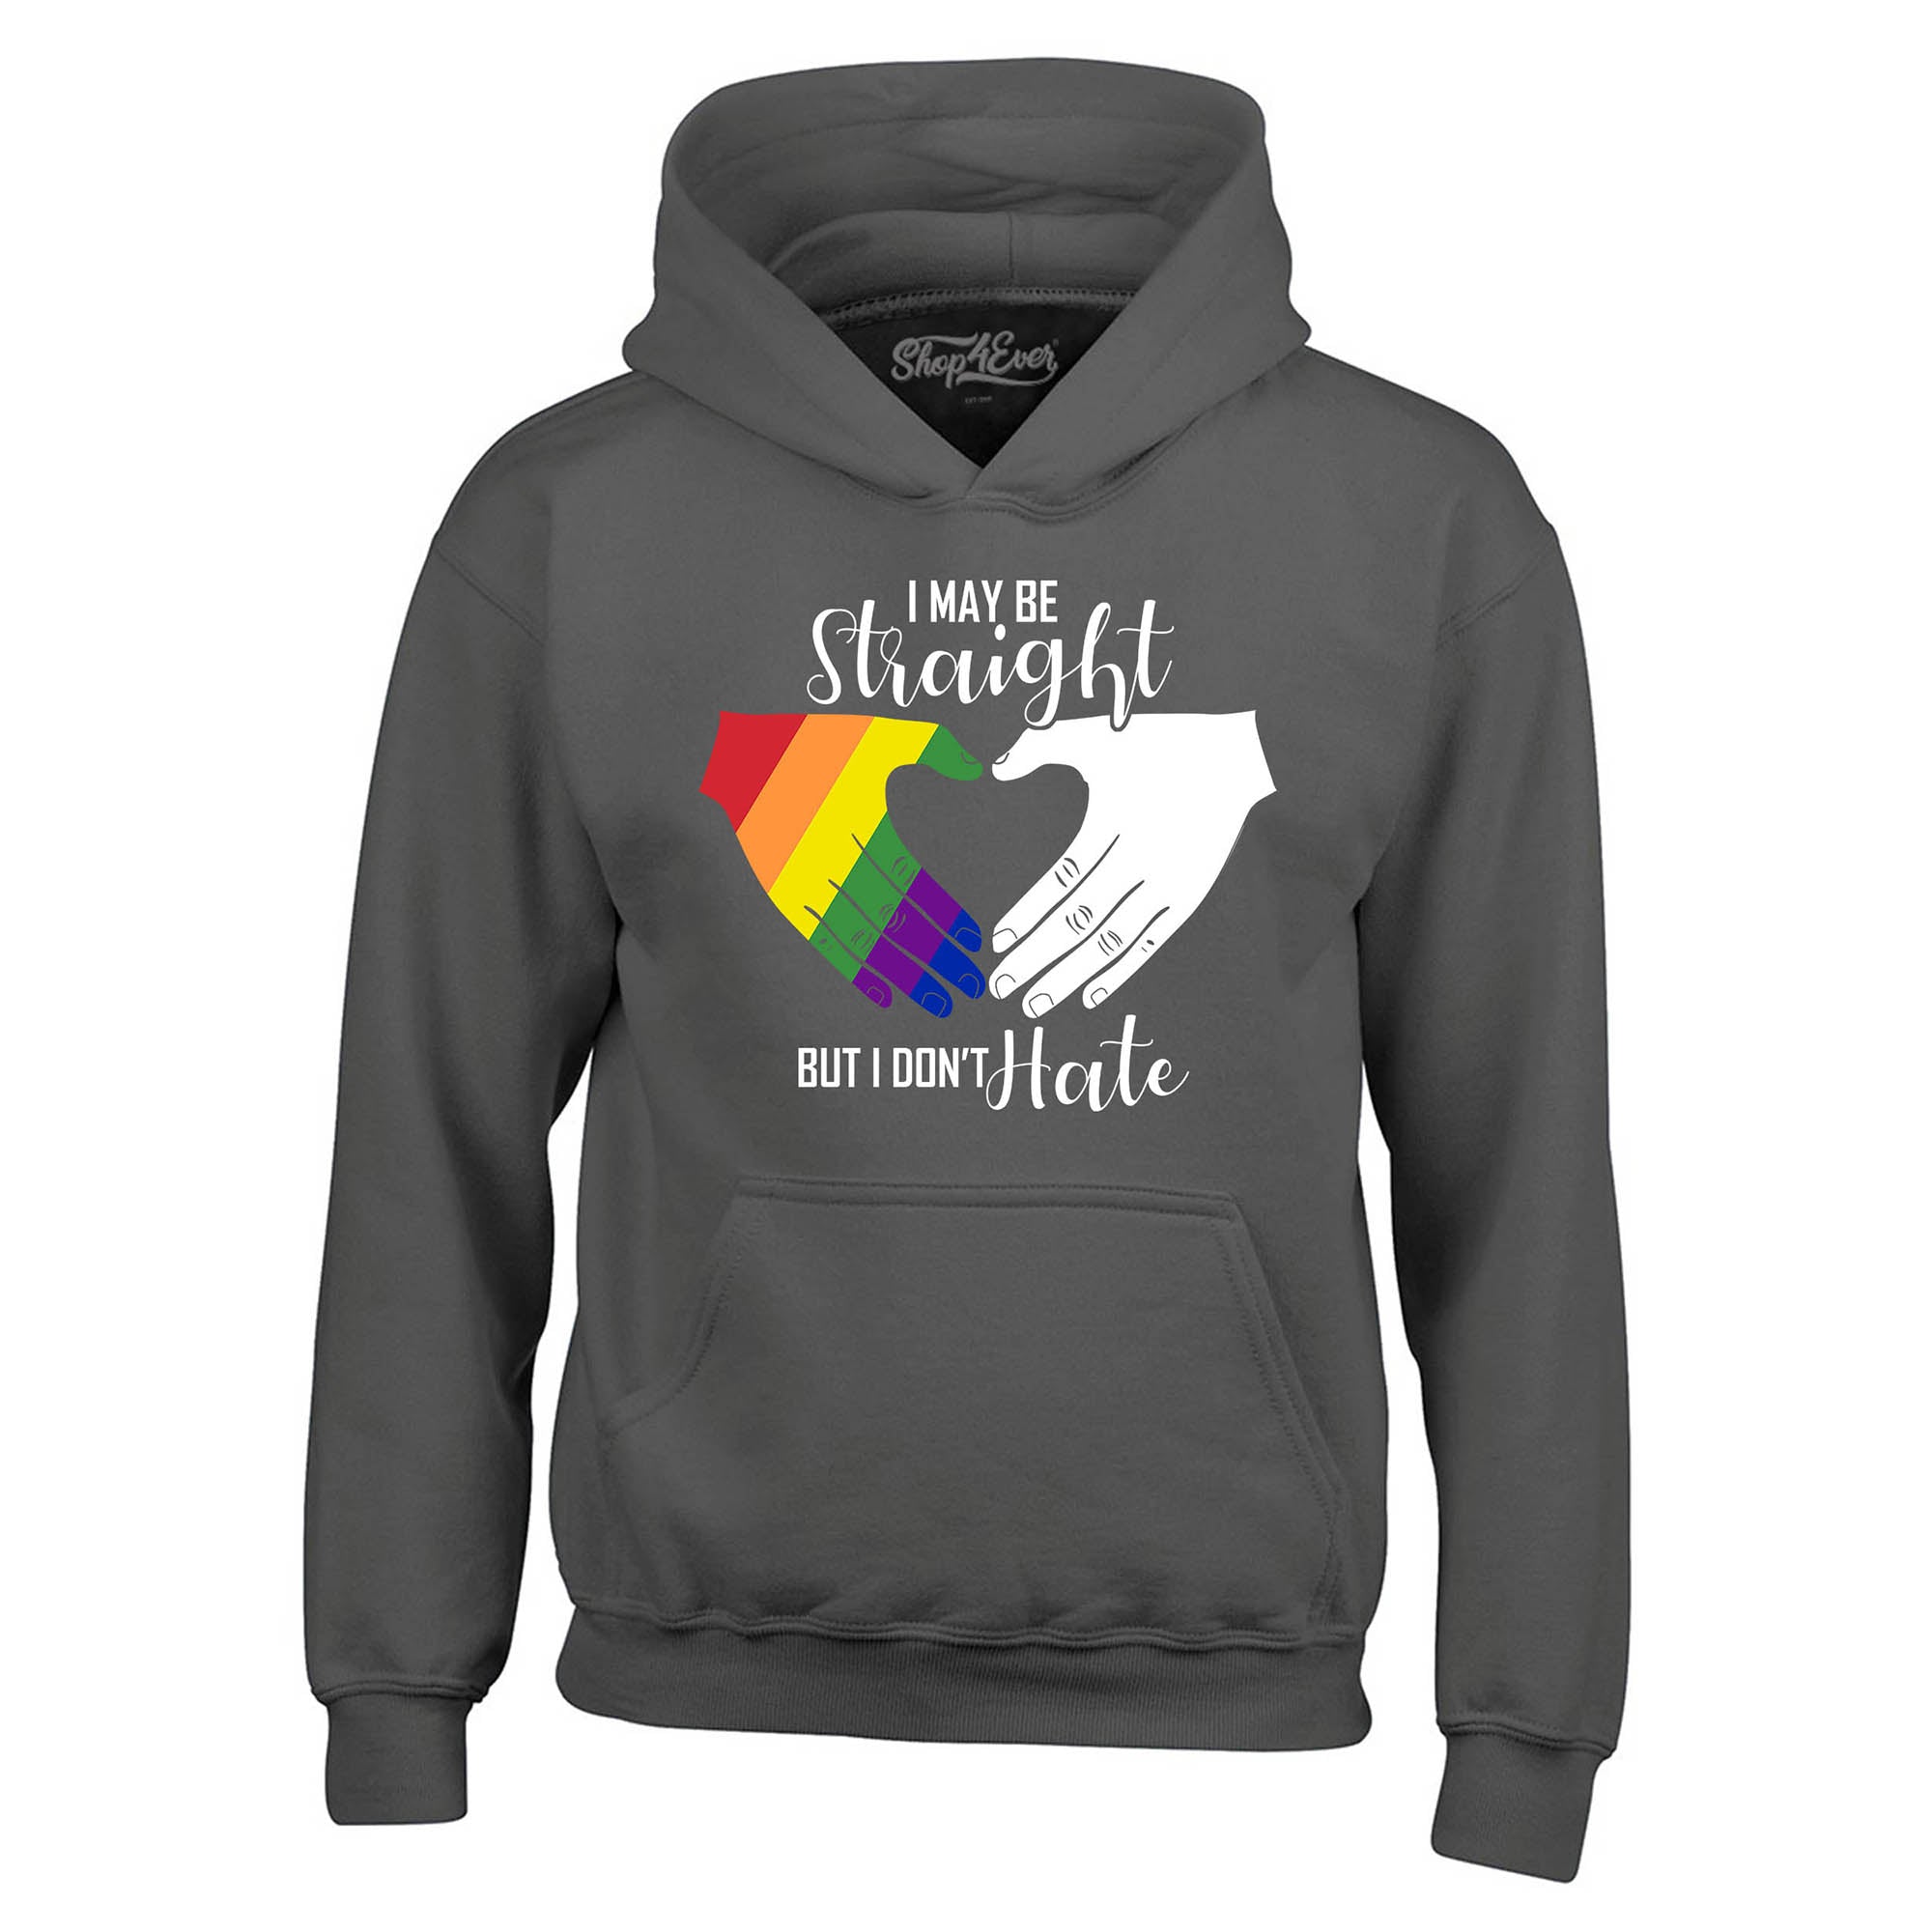 I May Be Straight but I Don't Hate ~ Gay Pride Hoodie Sweatshirts